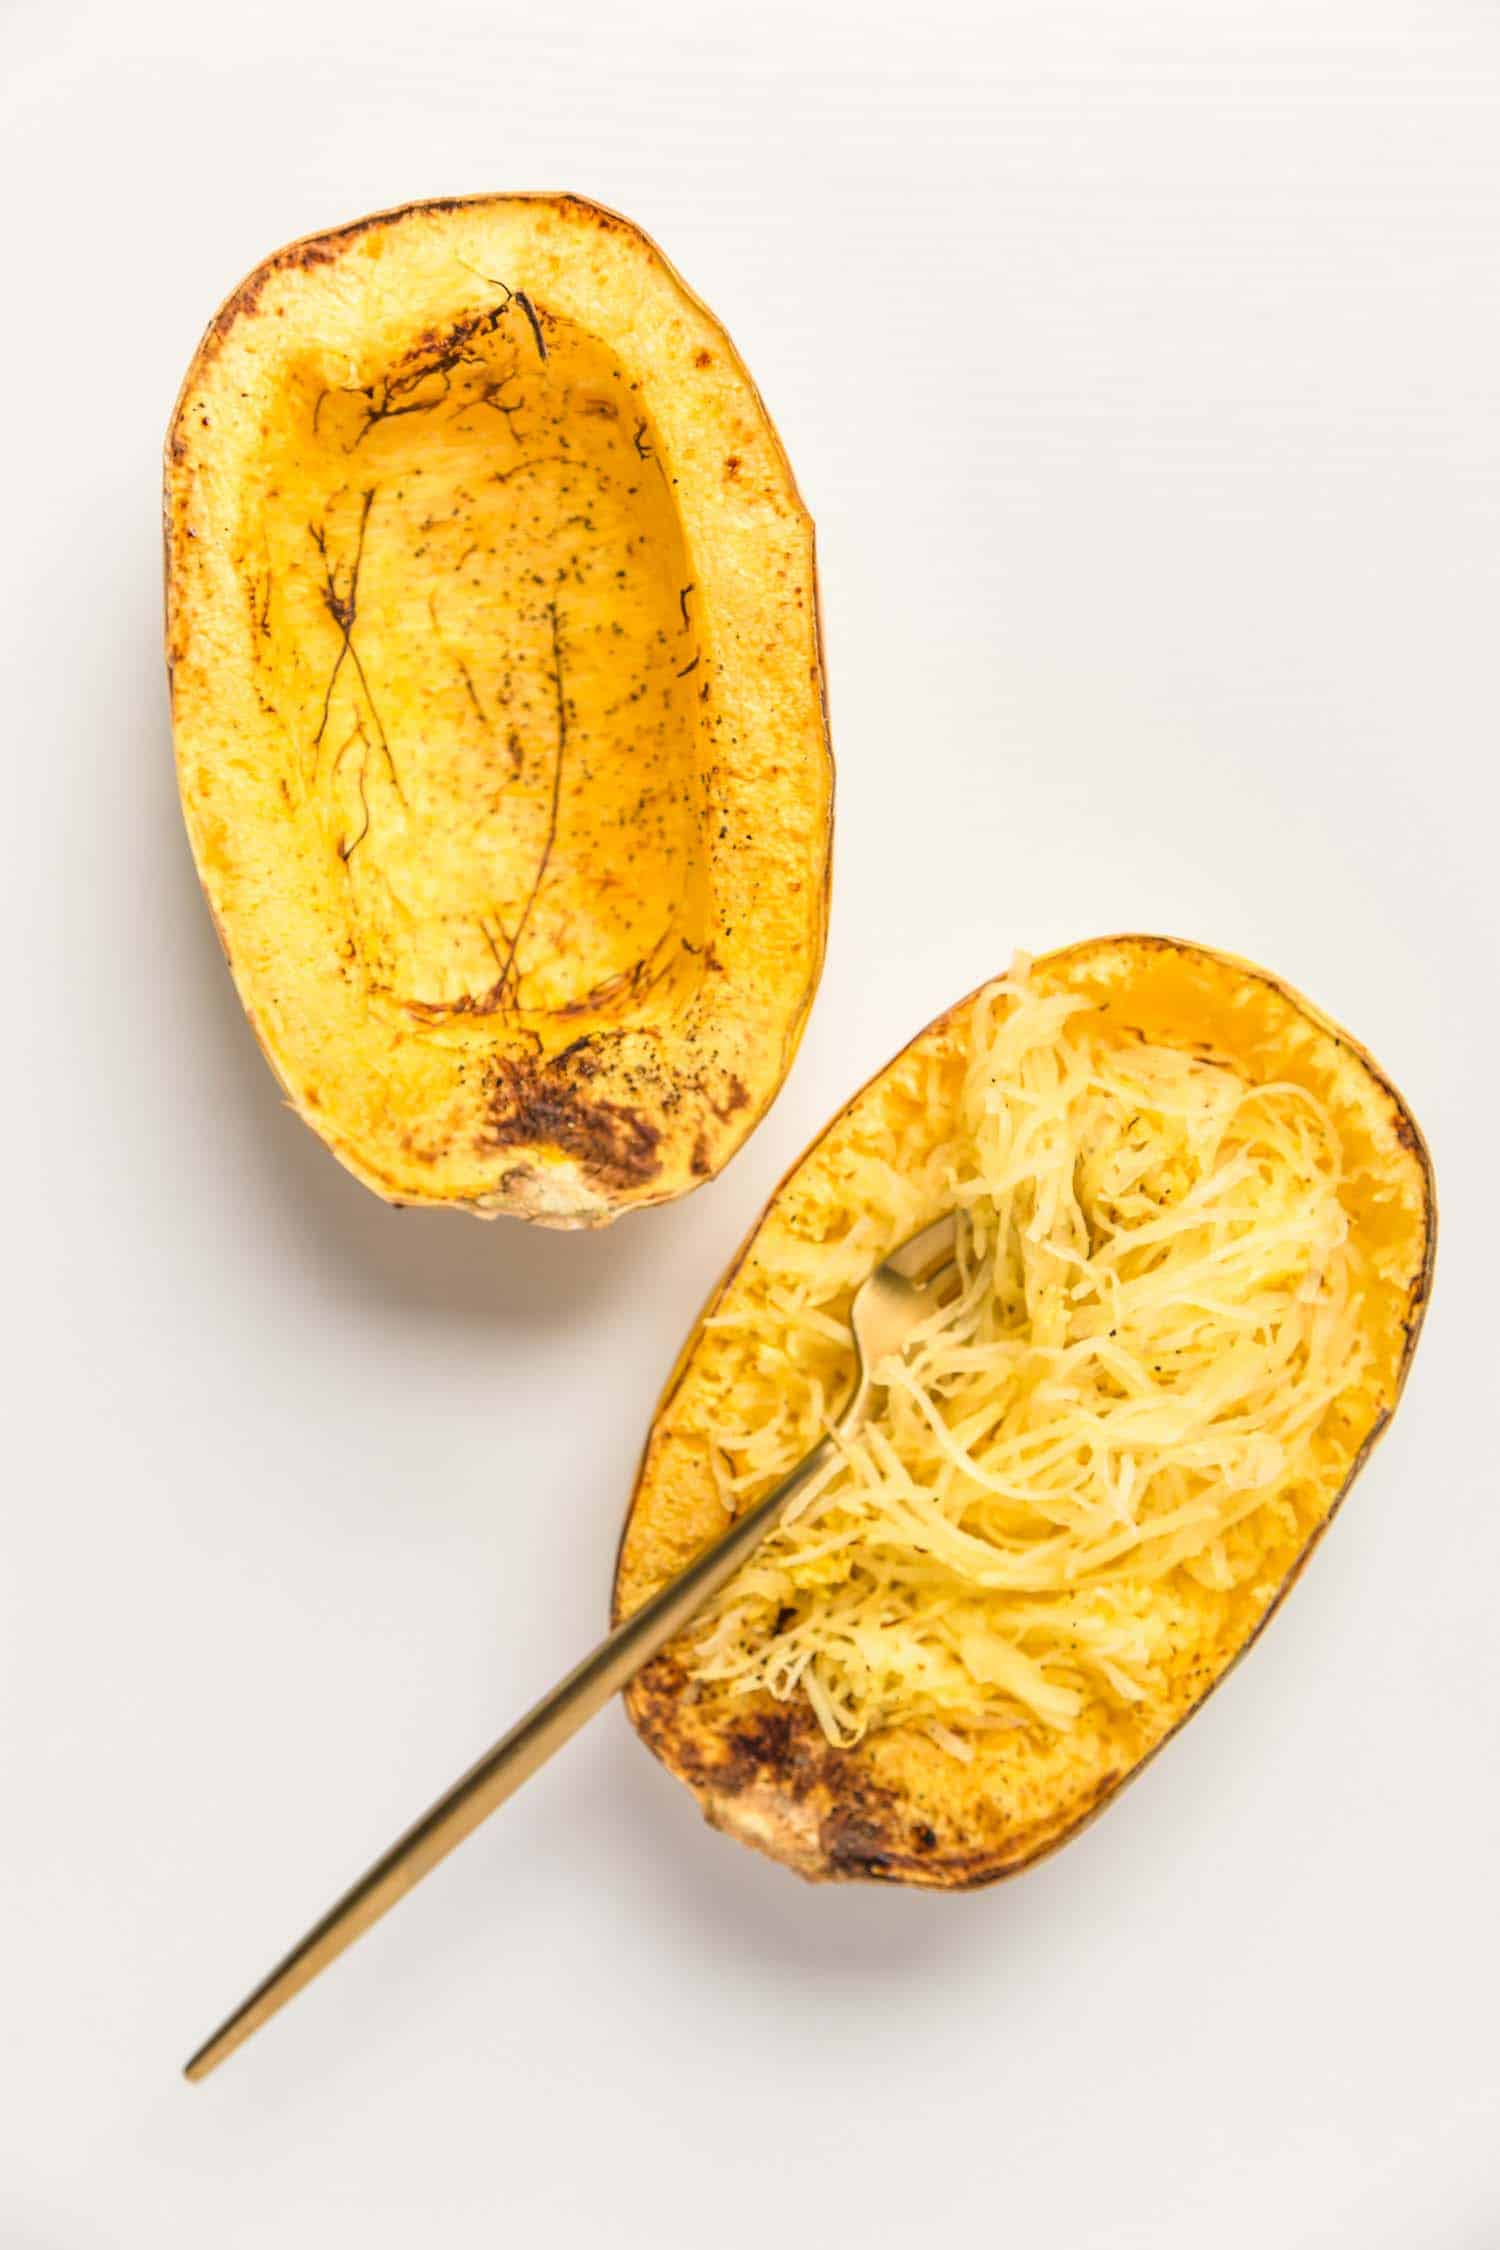 cooked spaghetti squash with noodle strands fluffed up with a fork  